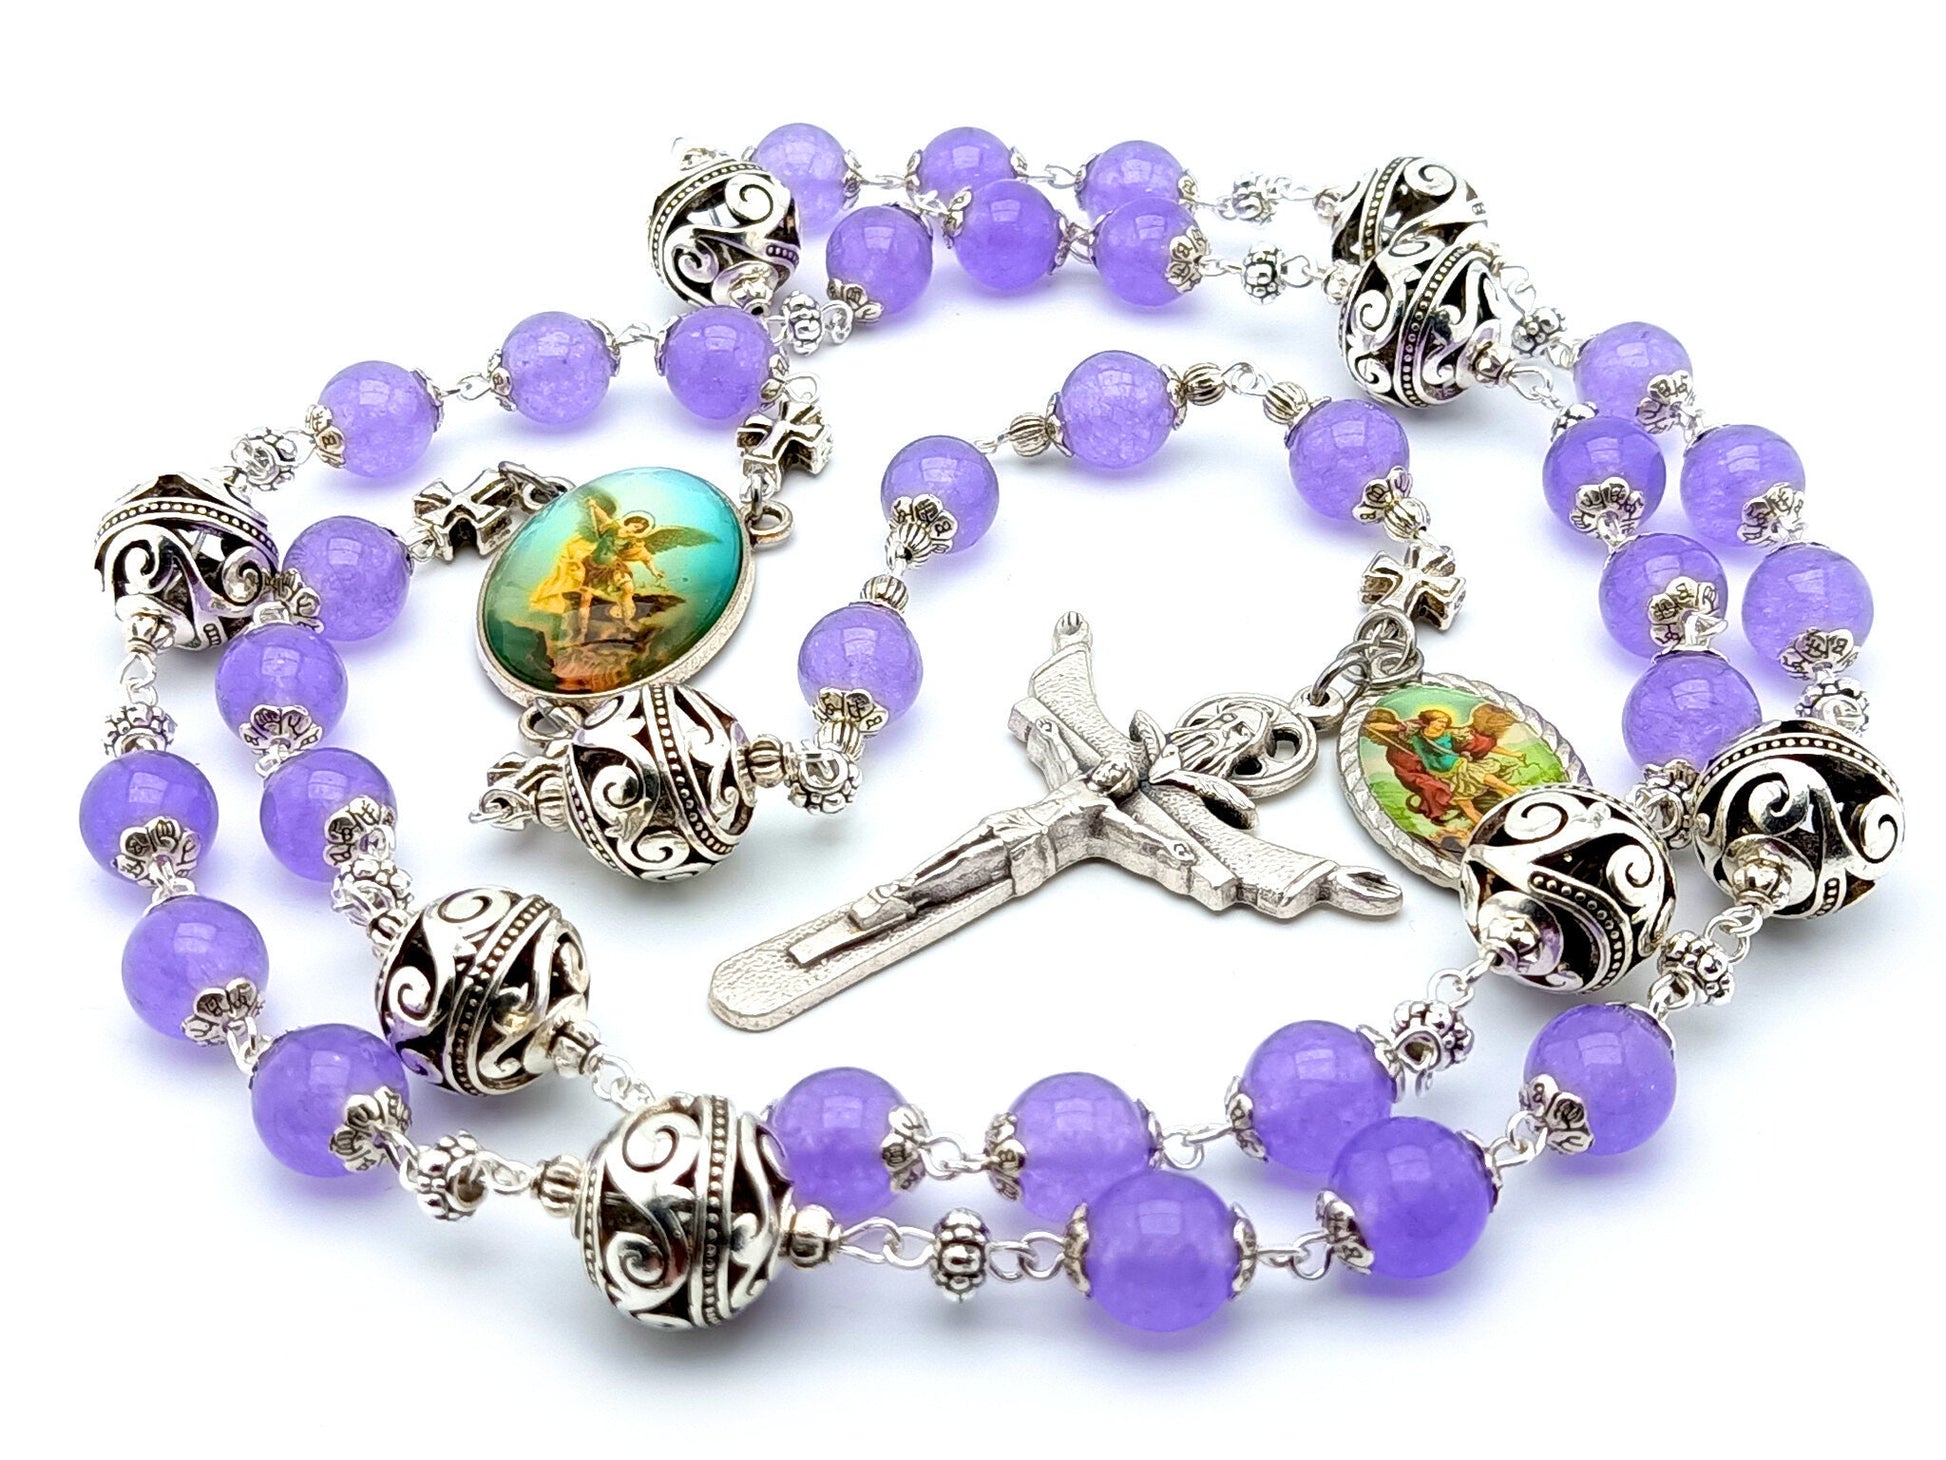 Saint Michael unique rosary beads prayer chaplet with alexandrite gemstone beads, silver pater beads, Trinity crucifix and picture centre medal.